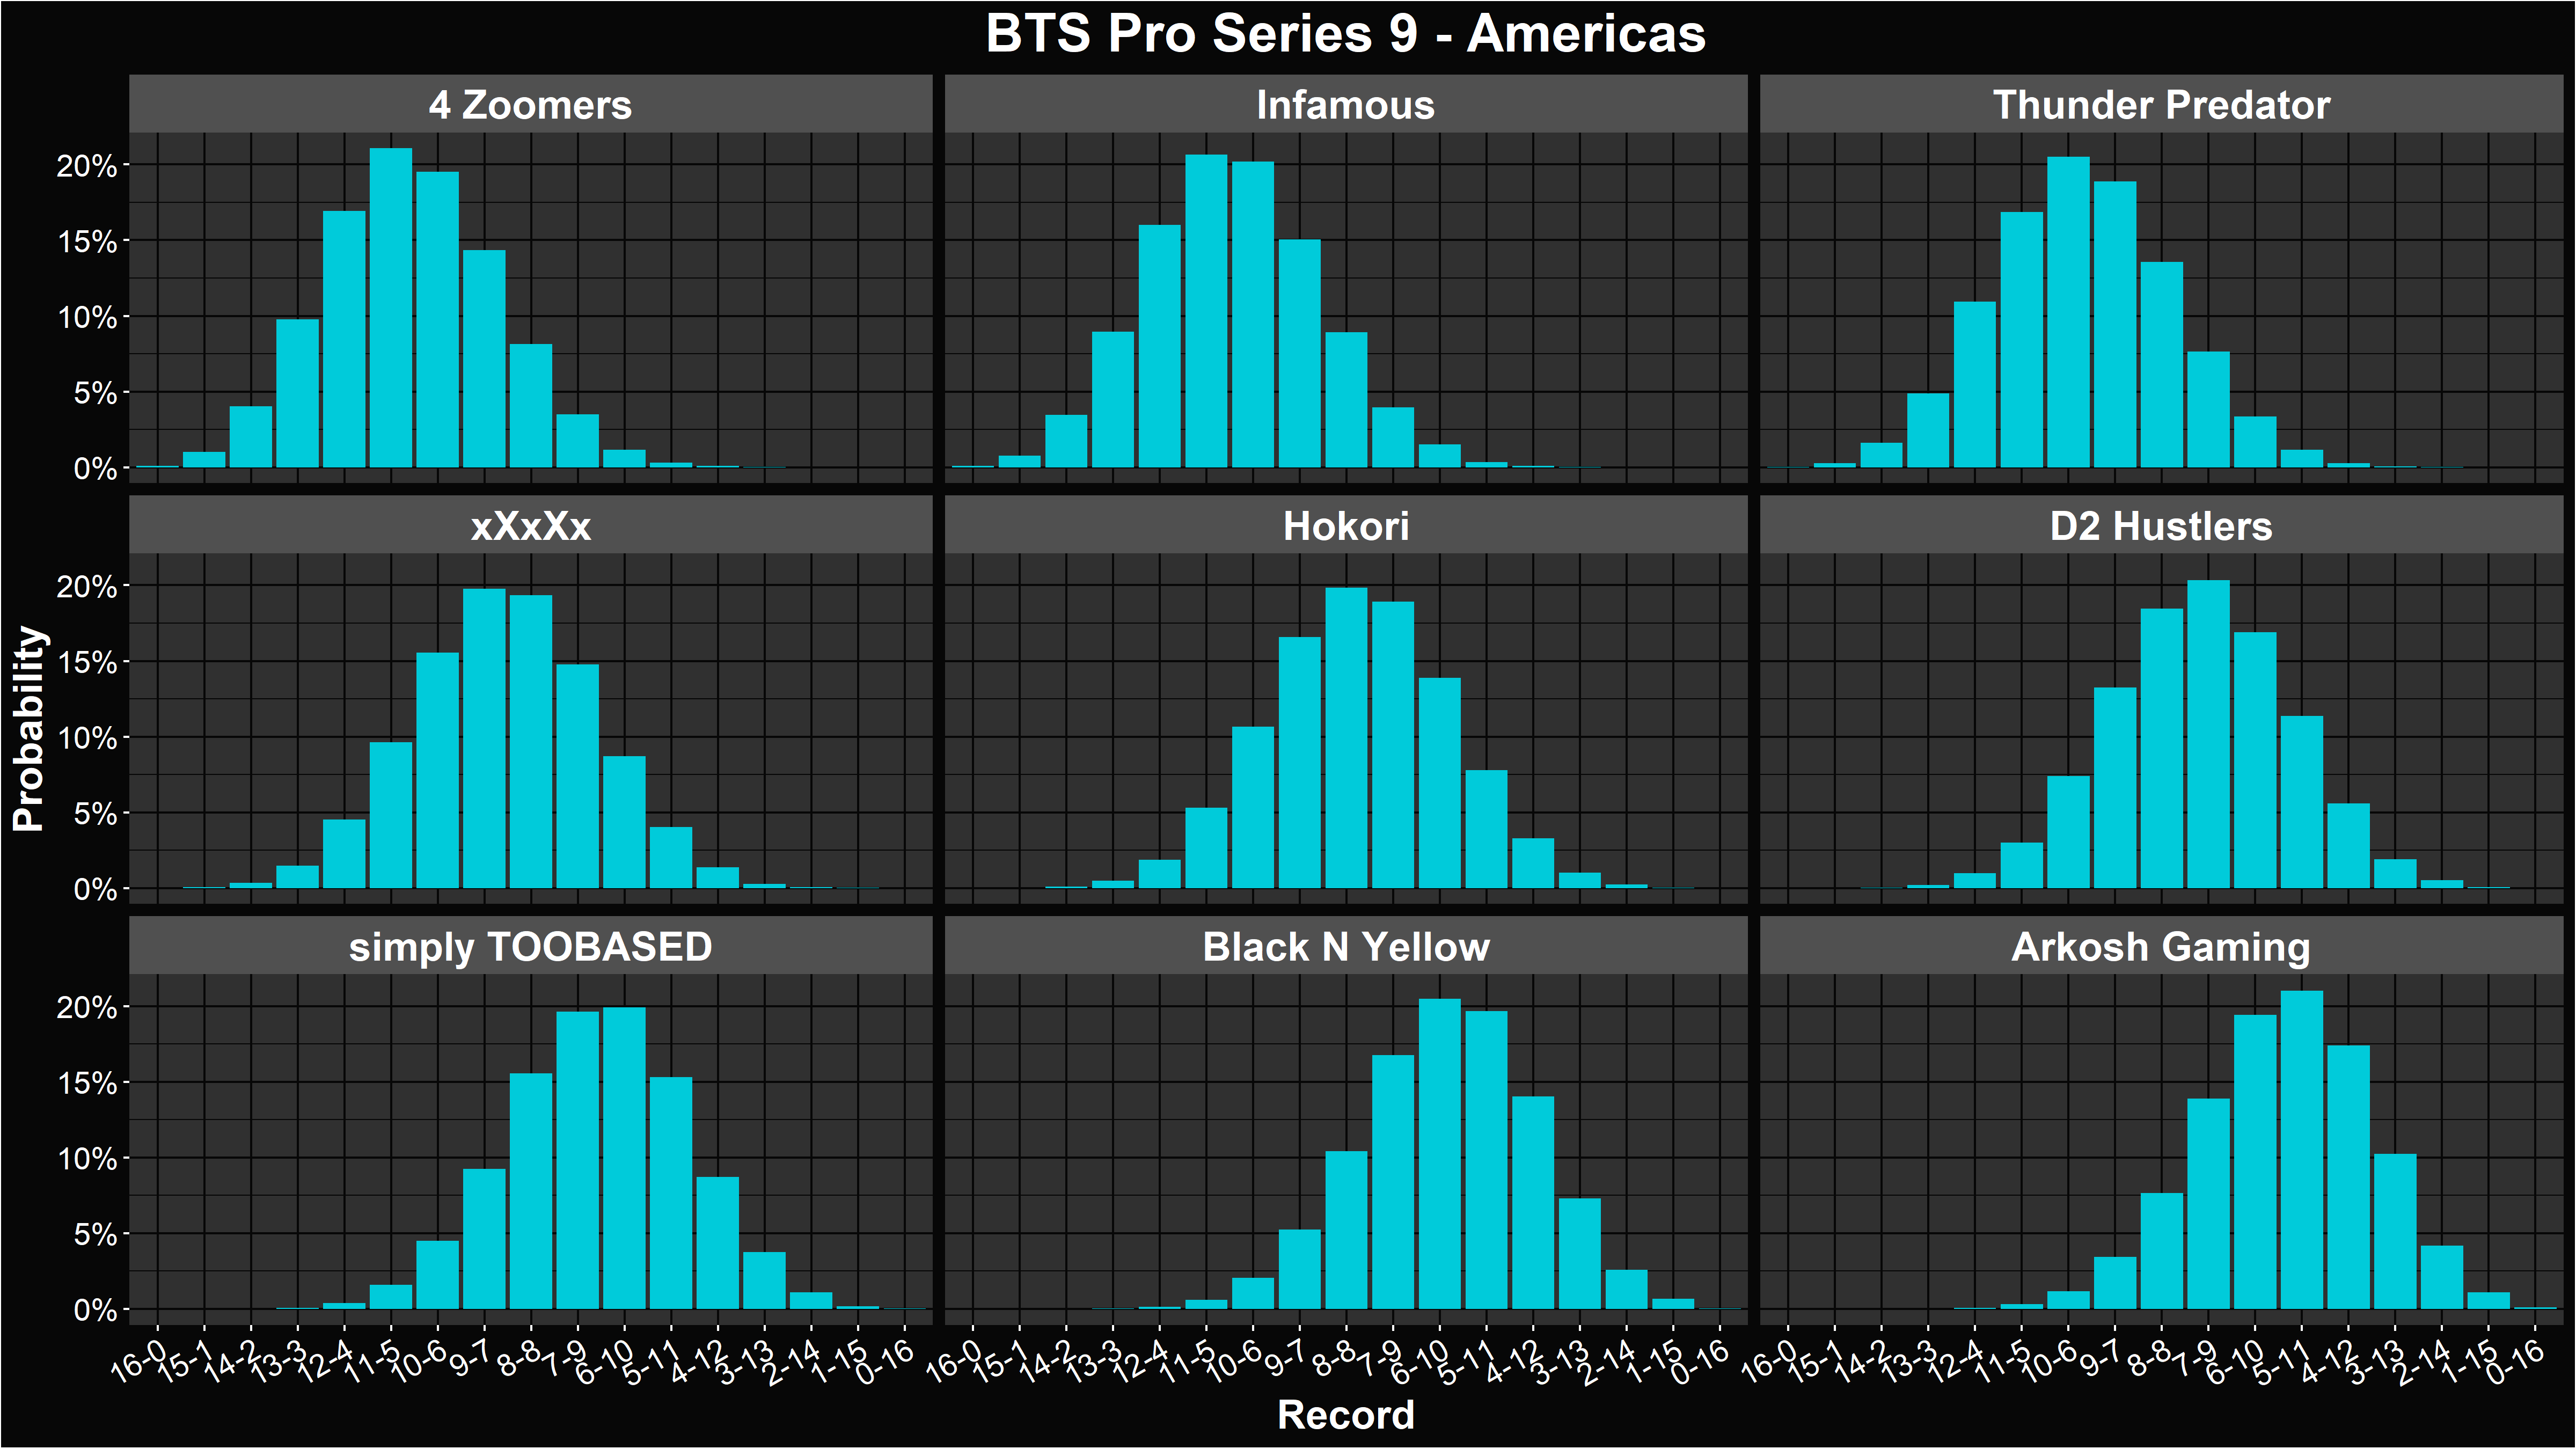 Alacrity's BTS Pro Series 9 Americas Group Stage Record Distributions